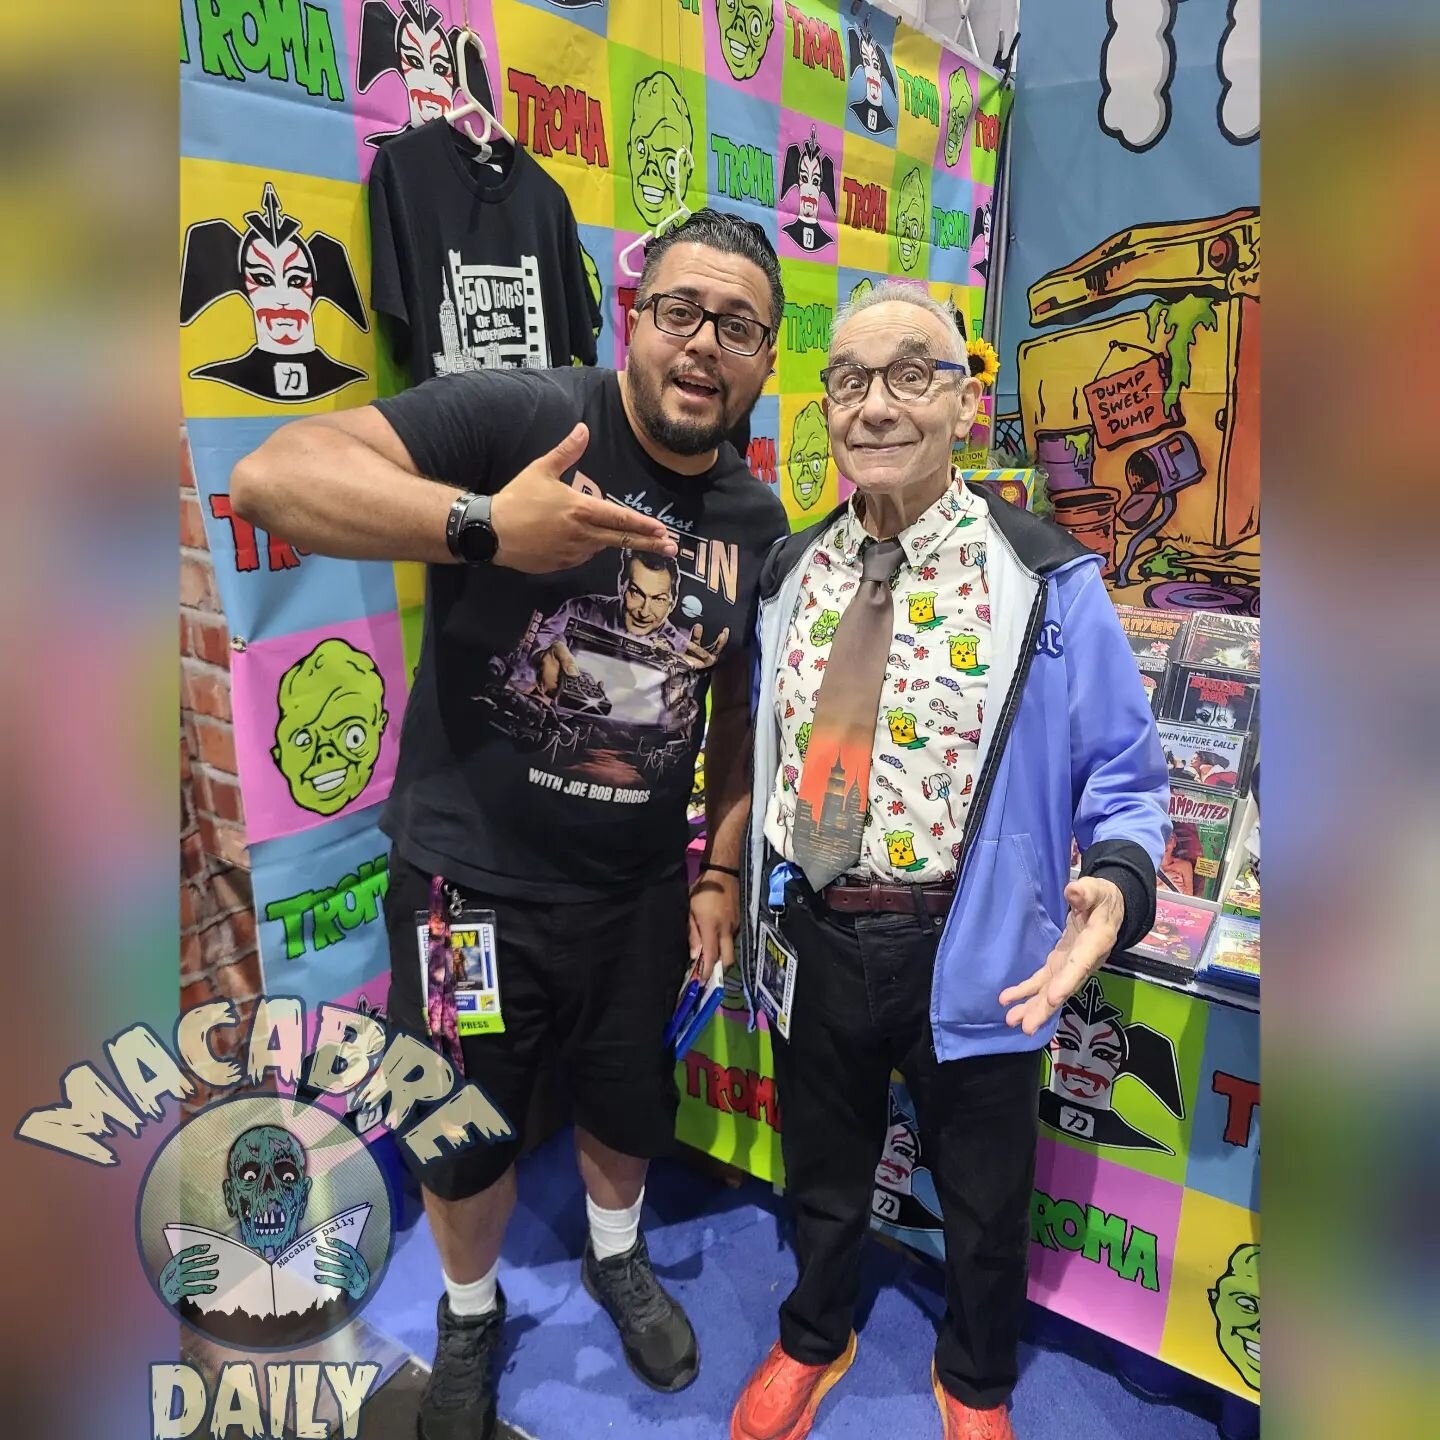 It's always a pleasure running into @unclelloydkaufman here at SDCC. He called us &quot;sexy&quot; we called him &quot;breath taking&quot; it was a good time had by all. Expect an interview soon!